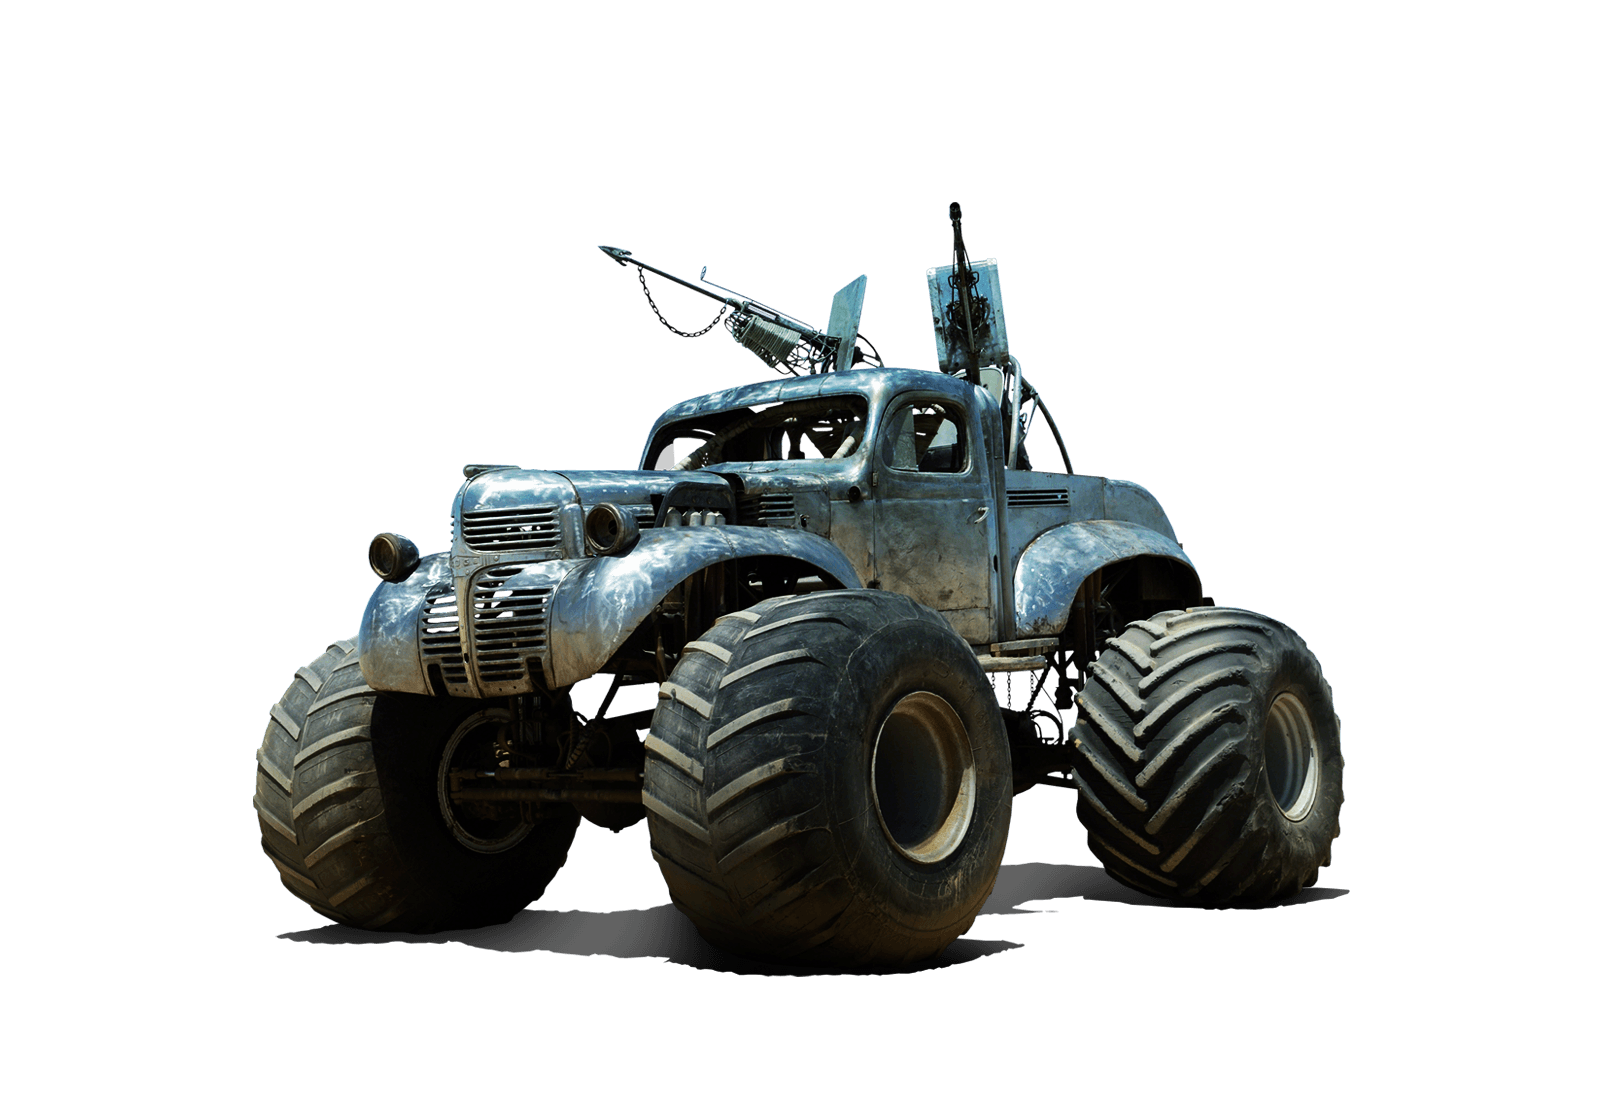 Mad Max Png - Slideshow Image, Transparent background PNG HD thumbnail